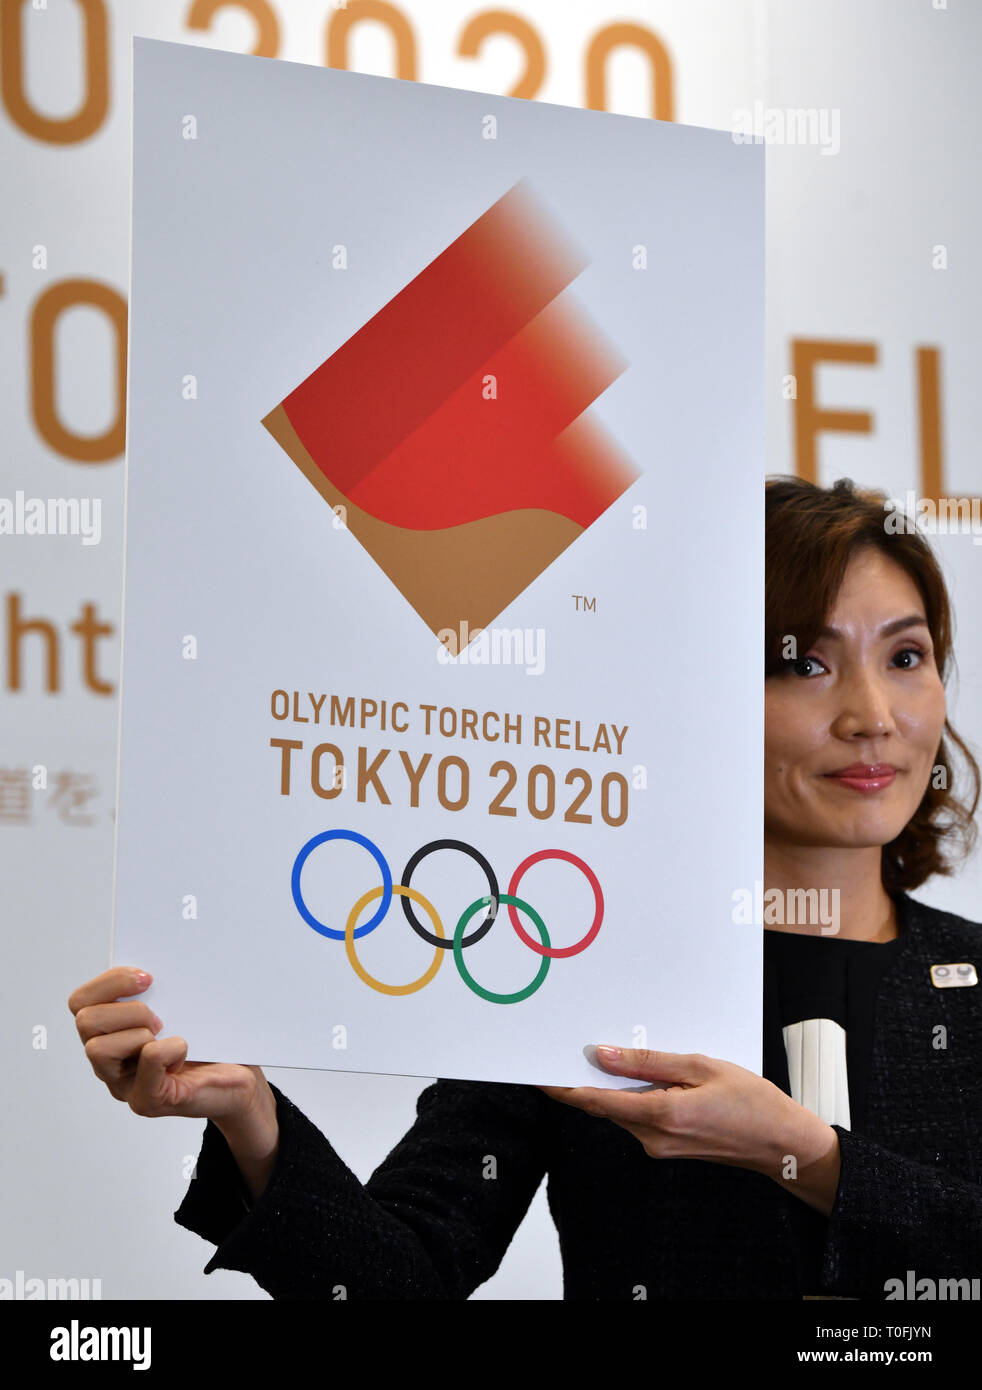 Tokyo, Japan. 20th Mar, 2019. The Organizing Committee for the 2020 Tokyo Olympics and Paralympics unveils the design of the Olympic torch in Tokyo on Wednesday, March 20, 2019. The torch, bearing the motif of a cherry blossom, Japans national flower, will be used during the Tokyo 2020 Olympic torch relay.  (Photo by Natsuki Sakai/AFLO) AYF -mis- Credit: Aflo Co. Ltd./Alamy Live News Stock Photo